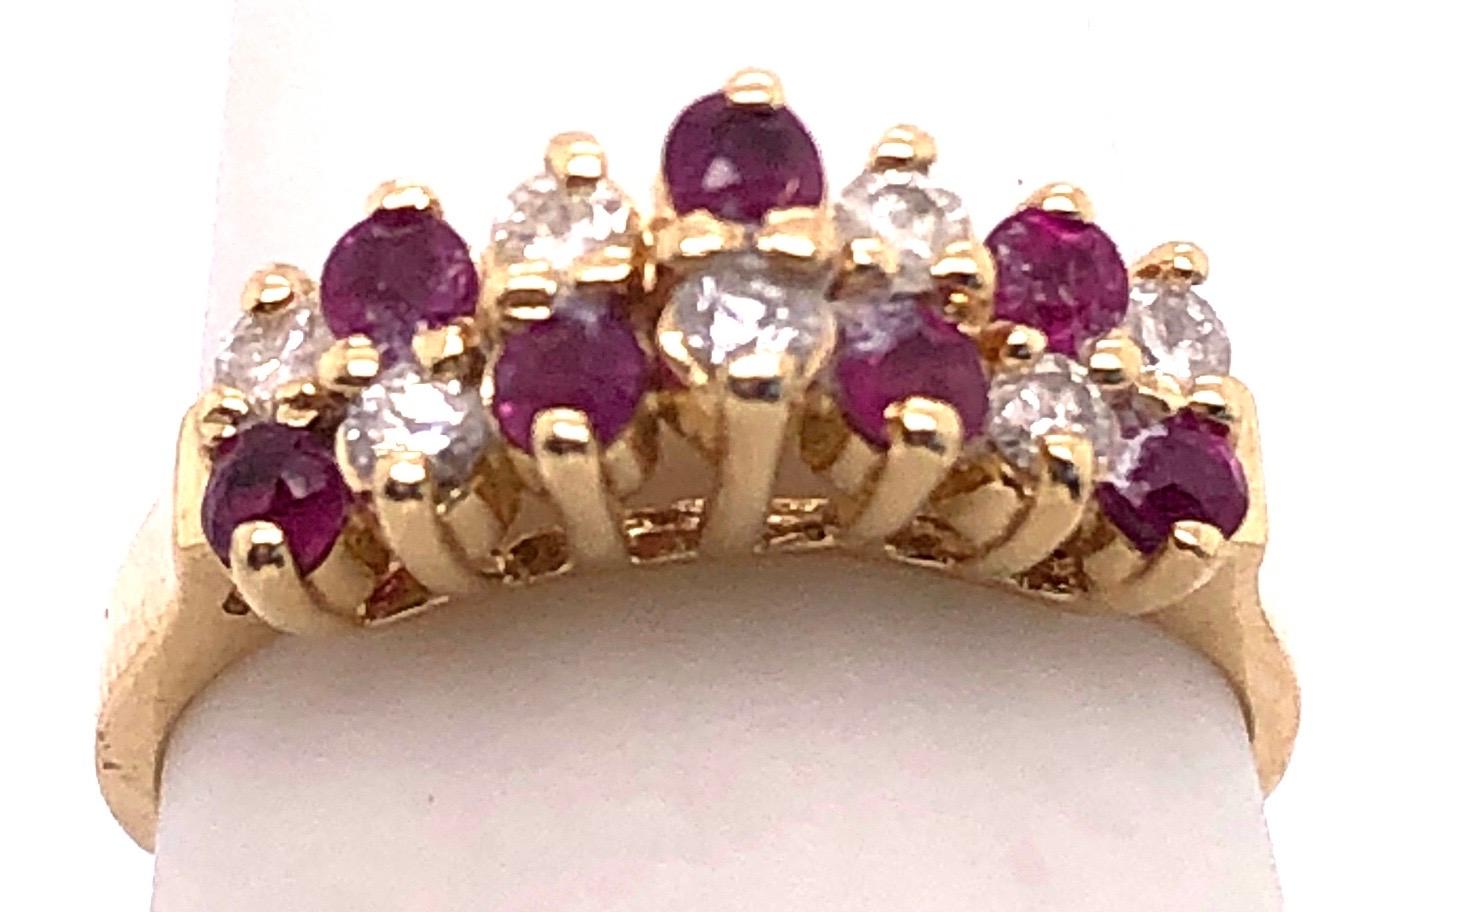 14 Karat Yellow Gold Ruby and Diamond Fashion Ring
Size 5.75
2.91 grams total weight.